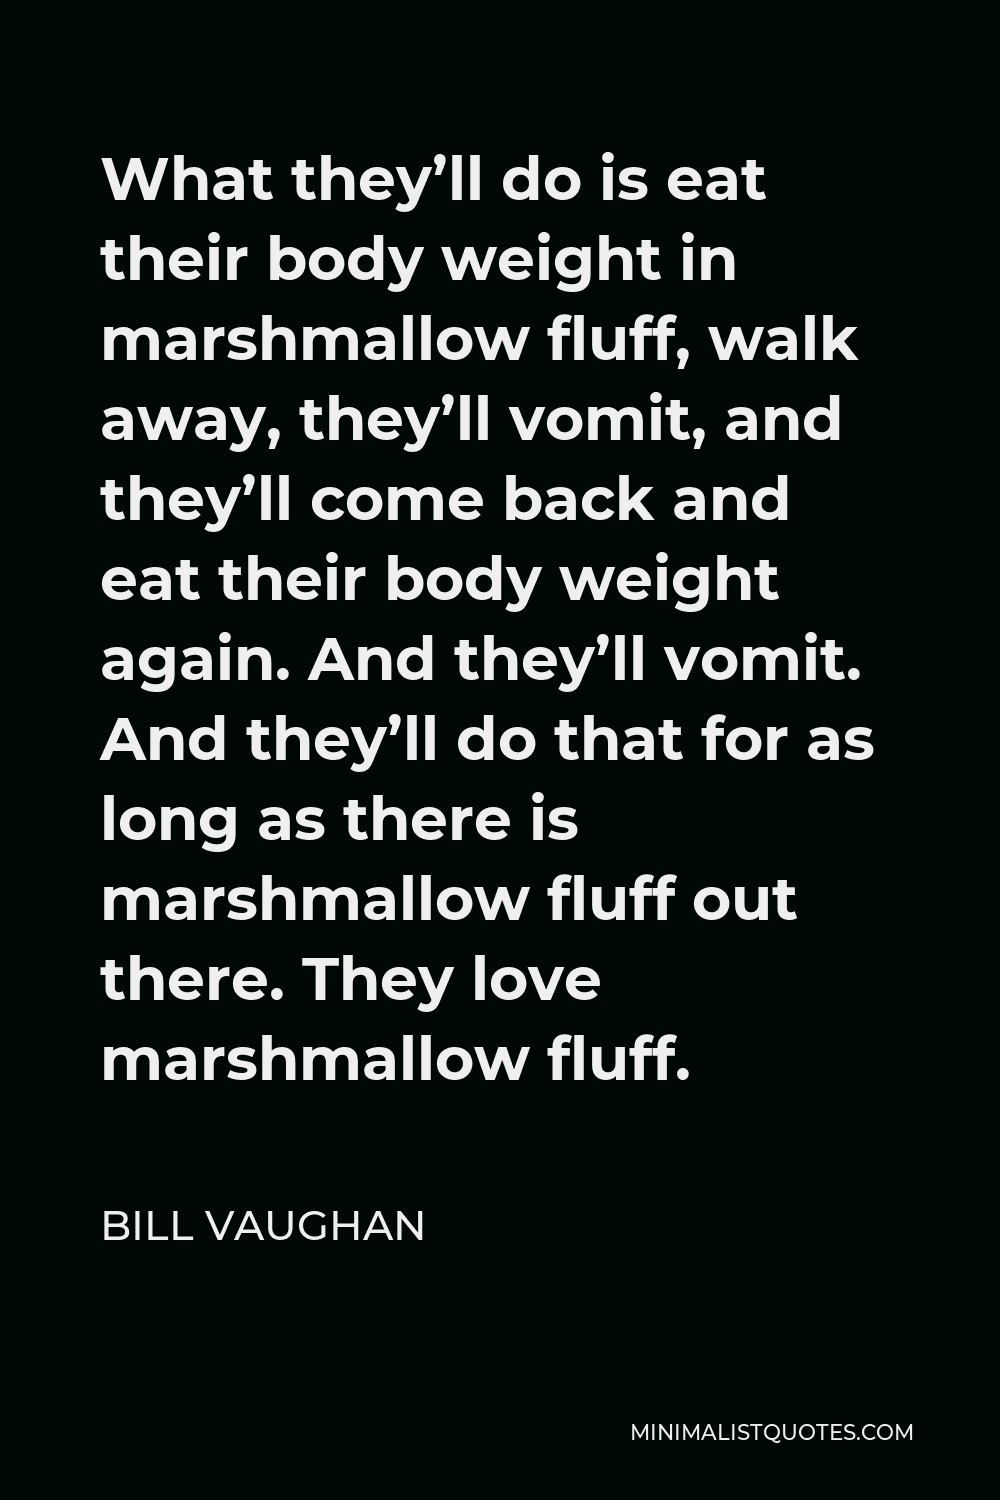 Bill Vaughan Quote - What they’ll do is eat their body weight in marshmallow fluff, walk away, they’ll vomit, and they’ll come back and eat their body weight again. And they’ll vomit. And they’ll do that for as long as there is marshmallow fluff out there. They love marshmallow fluff.